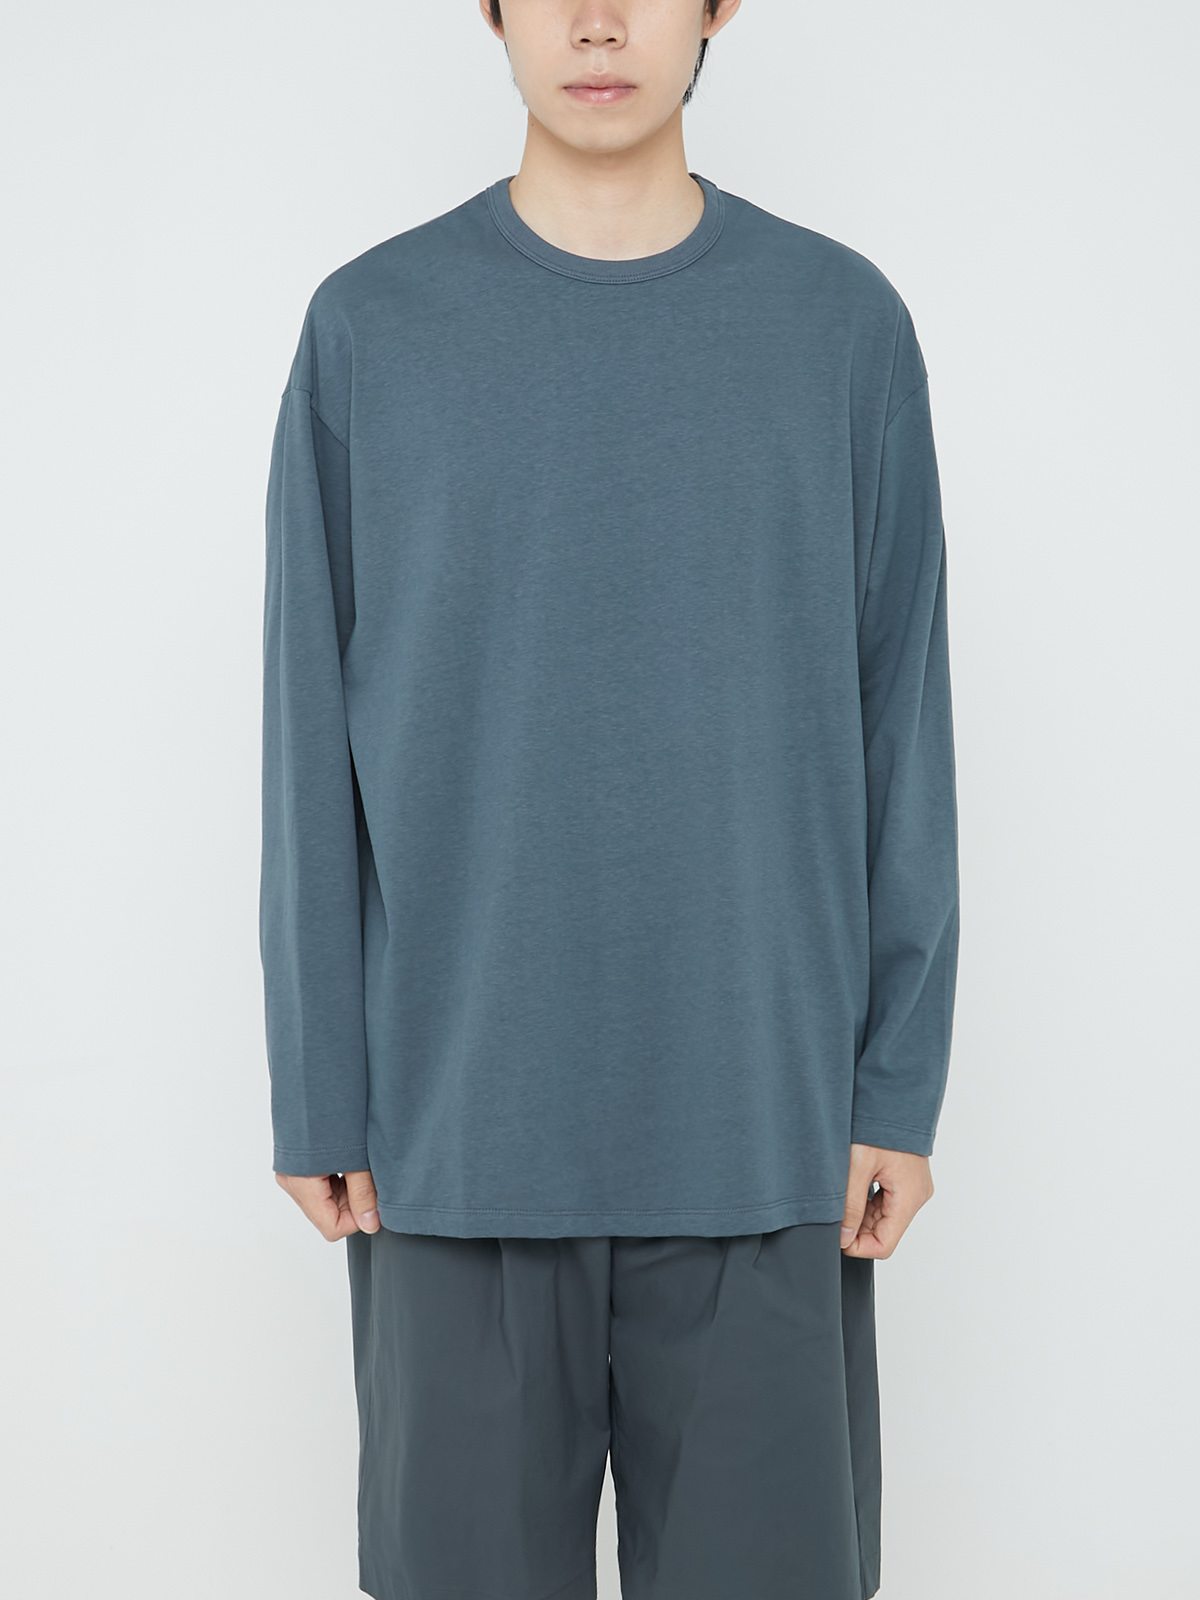 RECYCLED COTTON JERSEY L/S TEE (DARK SLATE)